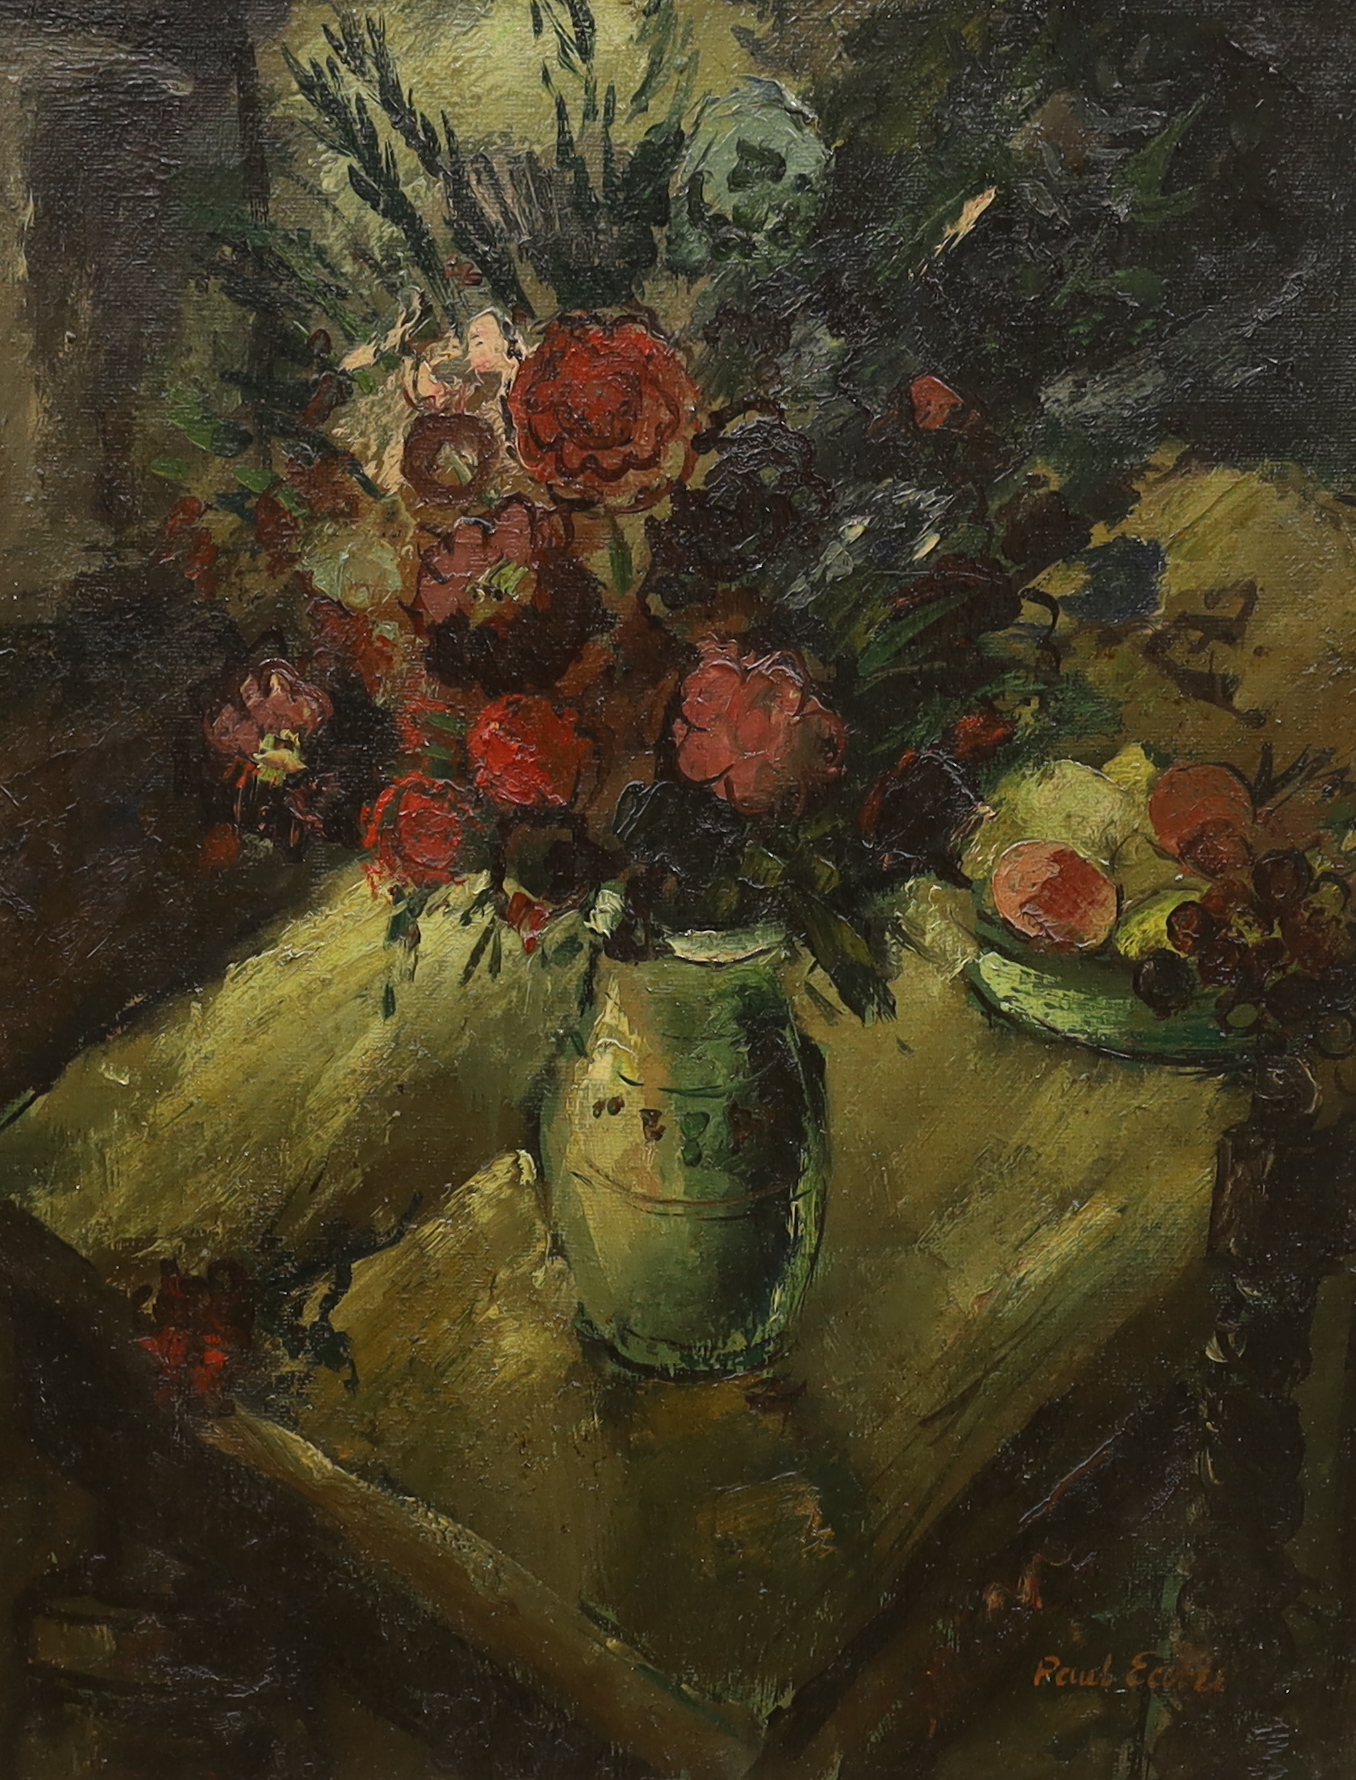 Paul Earee (1888-1968), In the manner of Ruskin Spear, oil on canvas, Still life of flowers and fruit, signed, details verso, 76 x 60cm